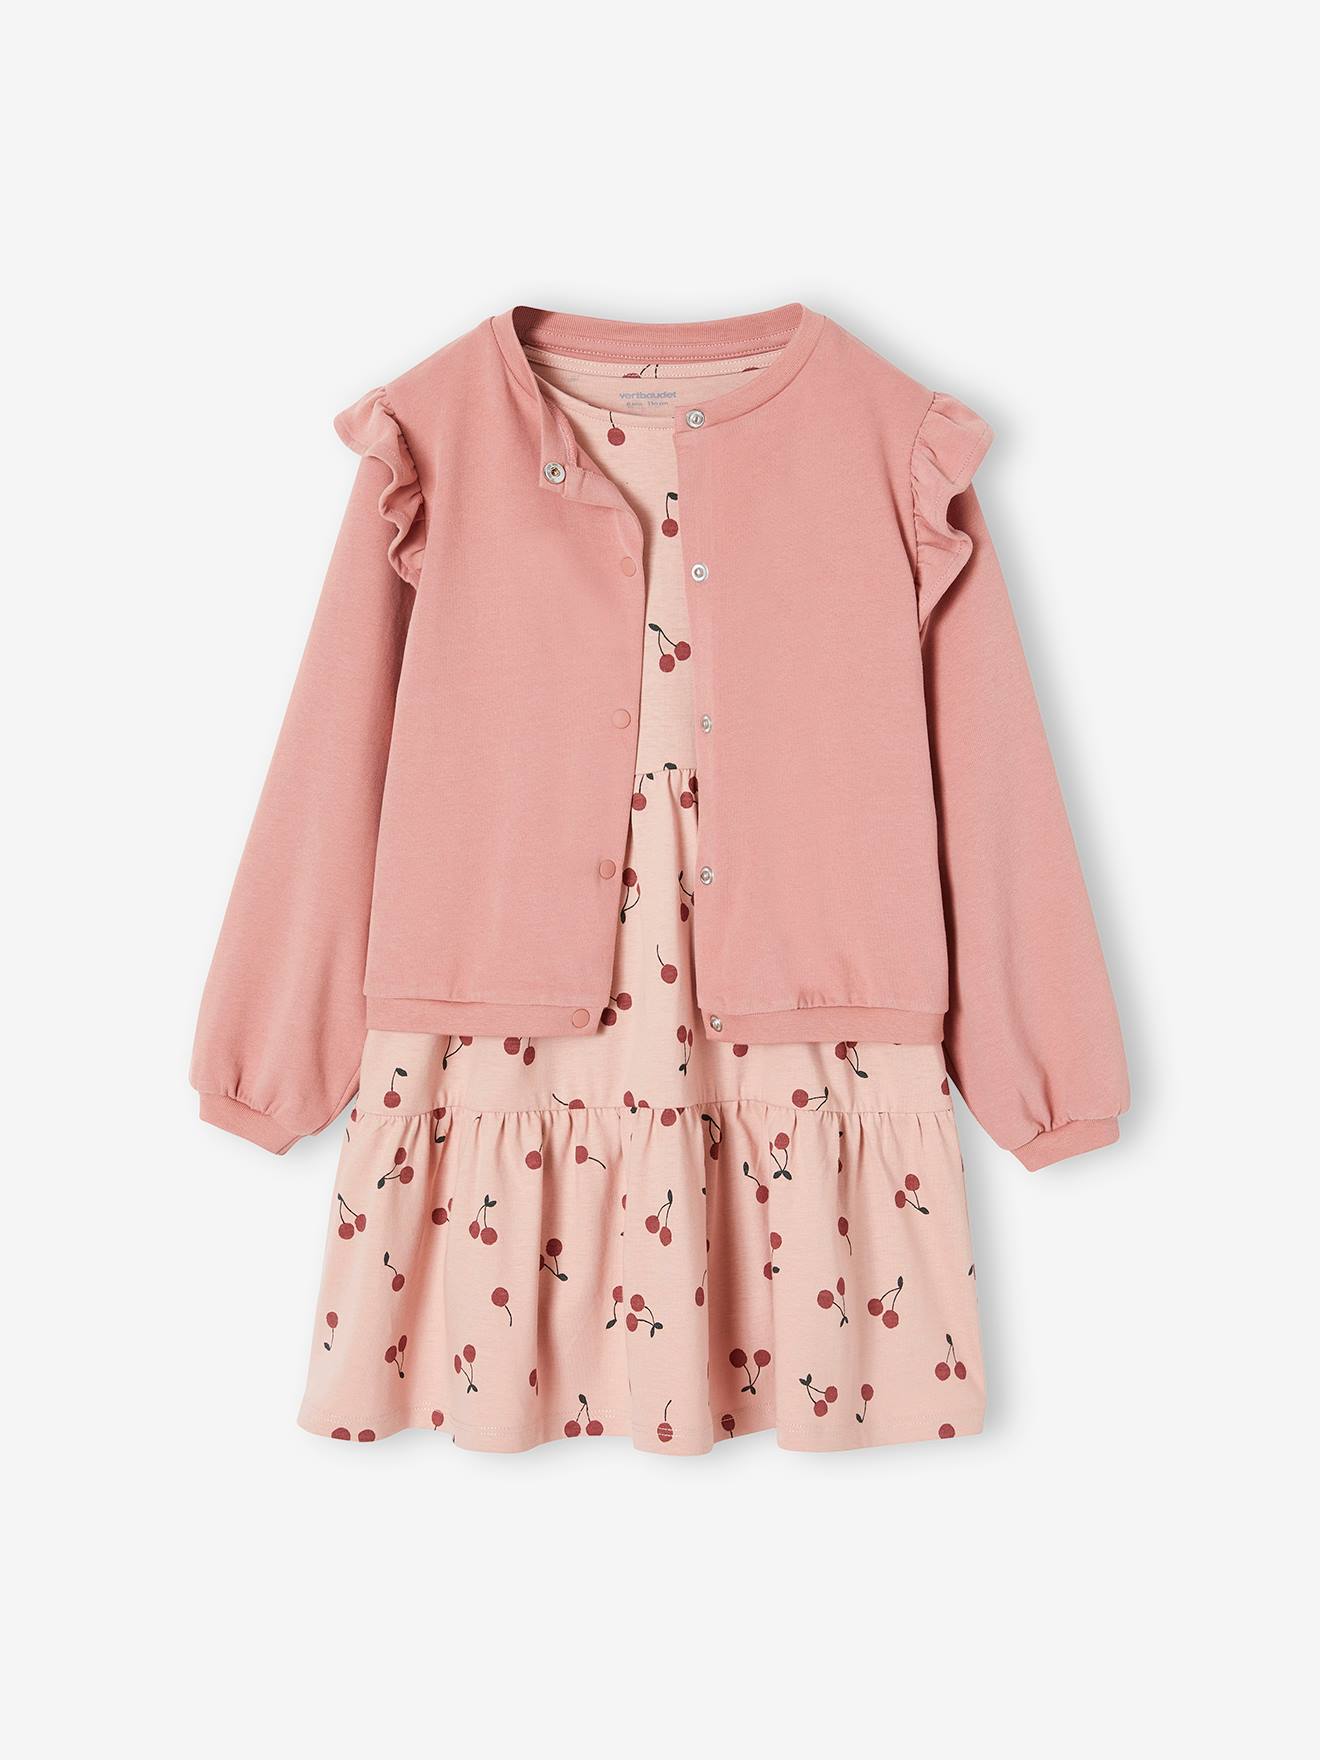 Dress + Cardigan with Ruffles Ensemble for Girls rosy